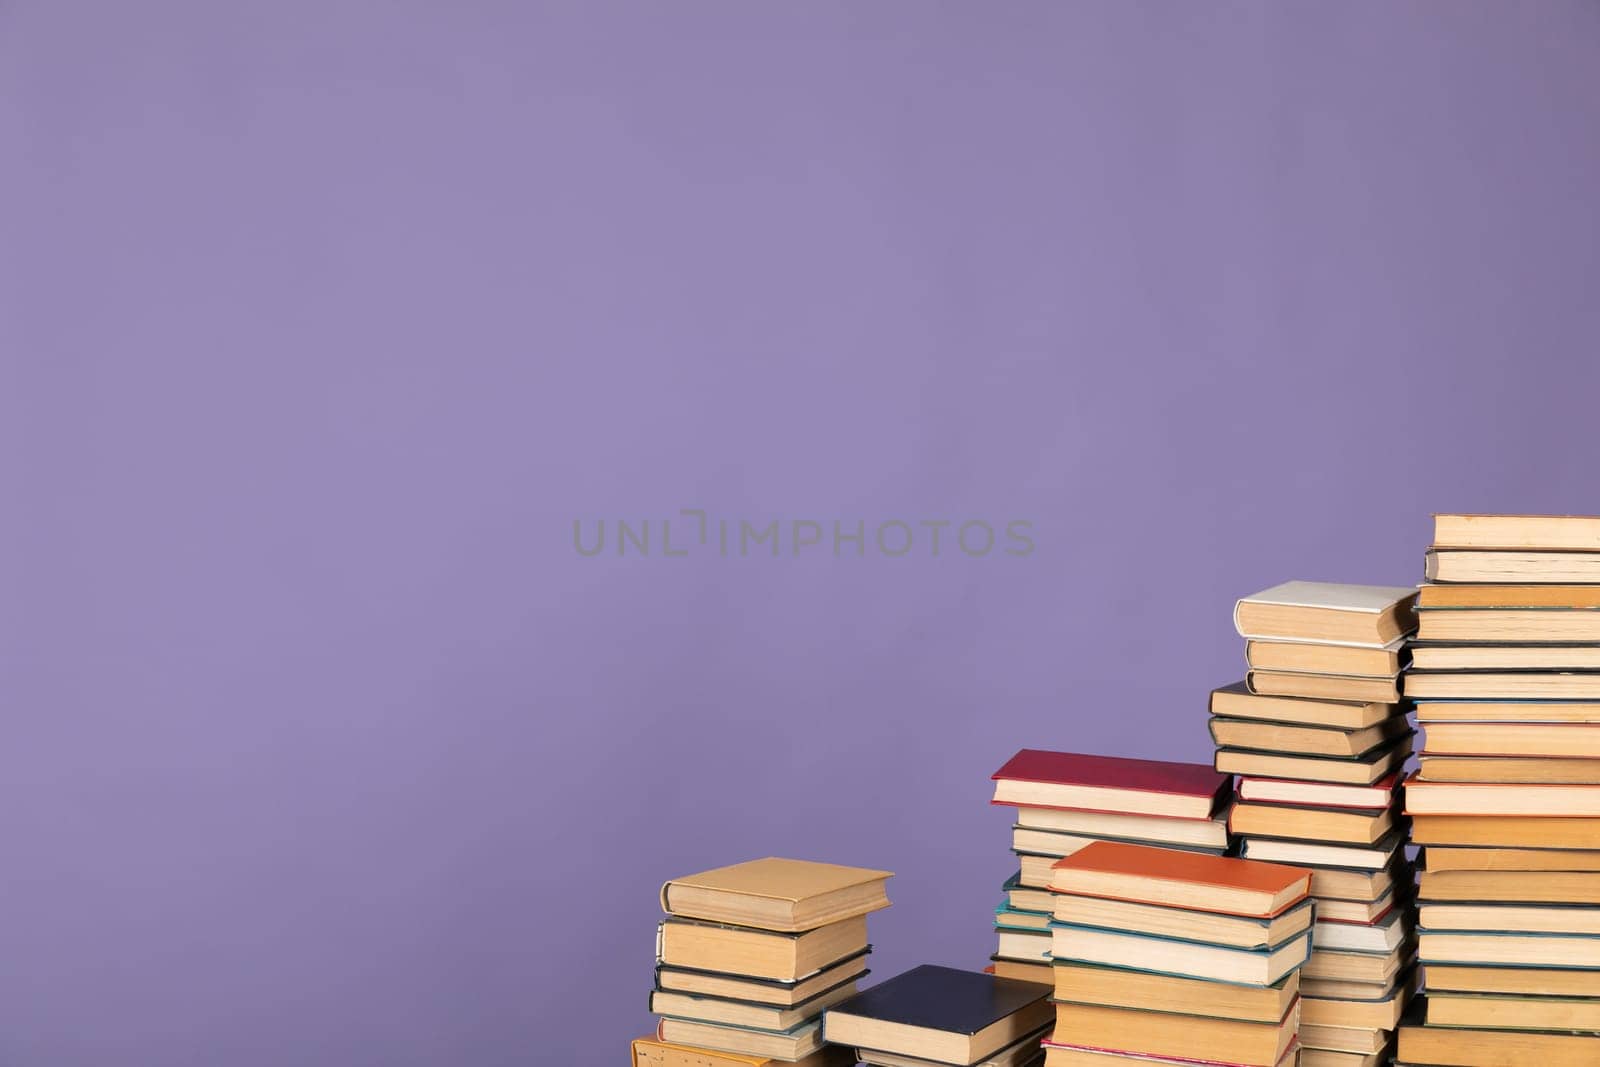 stacks of books scientific literature of knowledge in the library on a purple background by Simakov